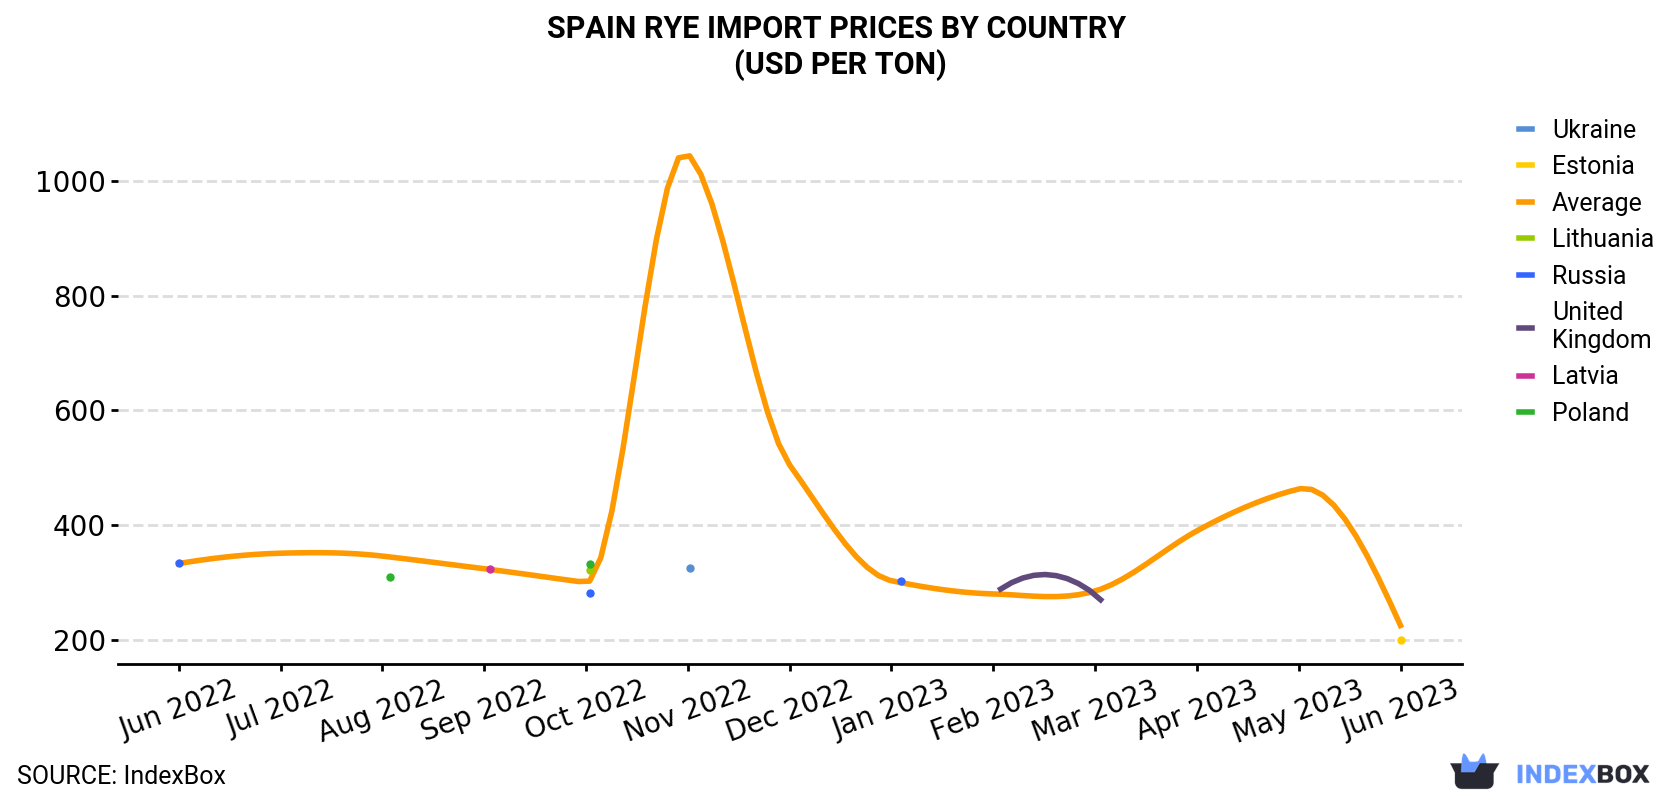 Spain Rye Import Prices By Country (USD Per Ton)